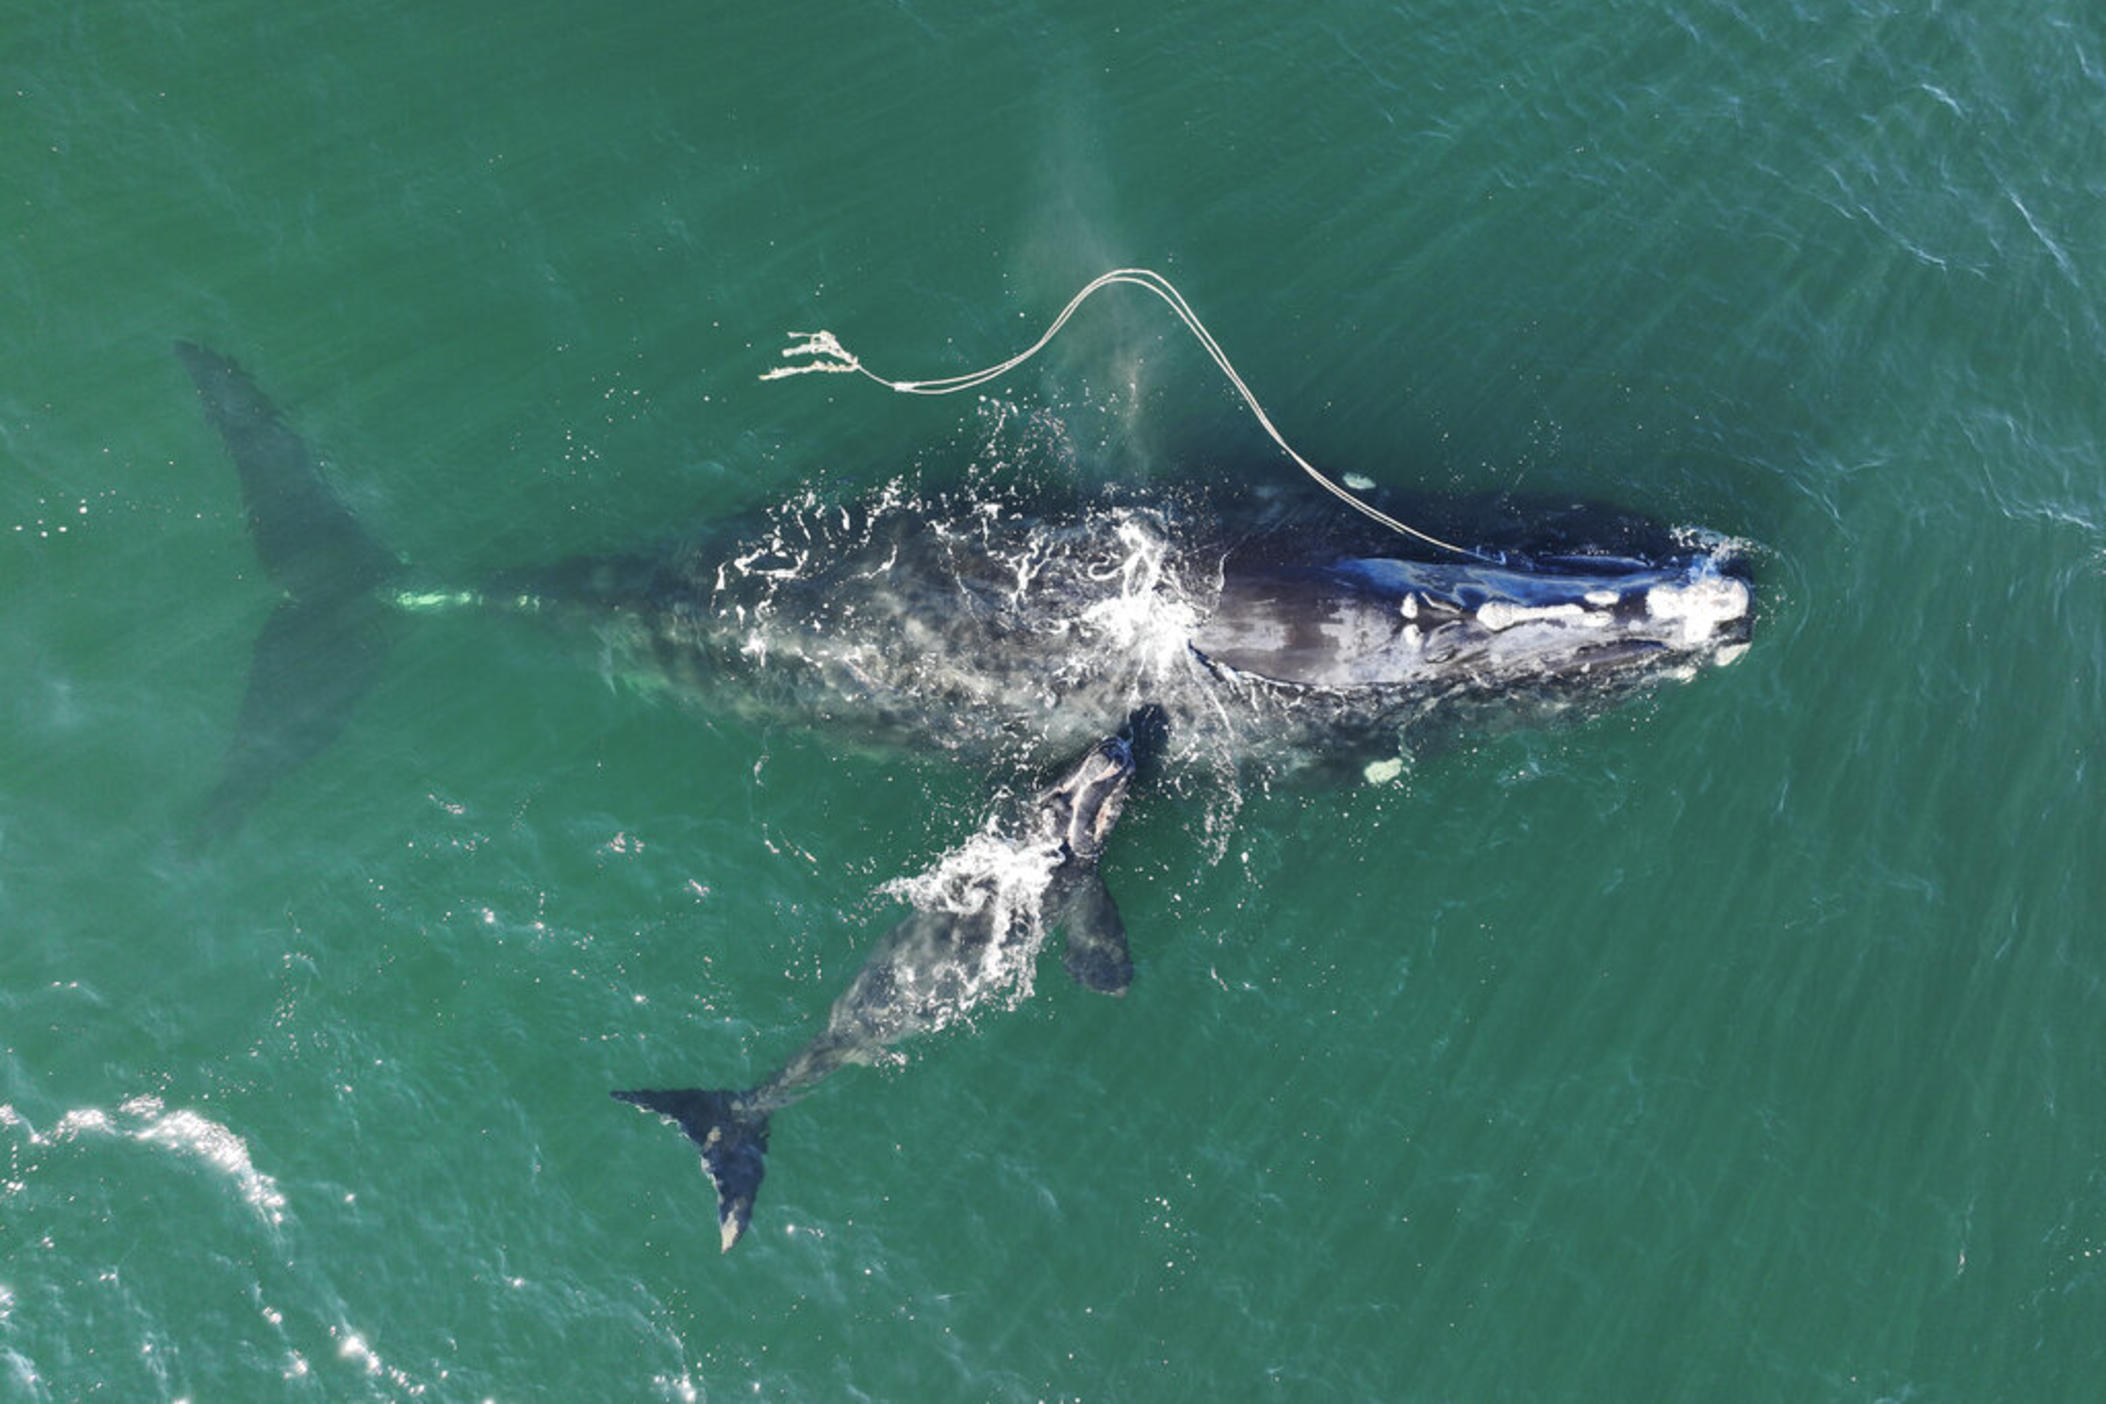 This Dec. 2, 2021, photo provided by the Georgia Department of Natural Resources shows an endangered North Atlantic right whale entangled in fishing rope being sighted with a newborn calf in waters near Cumberland Island, Ga.